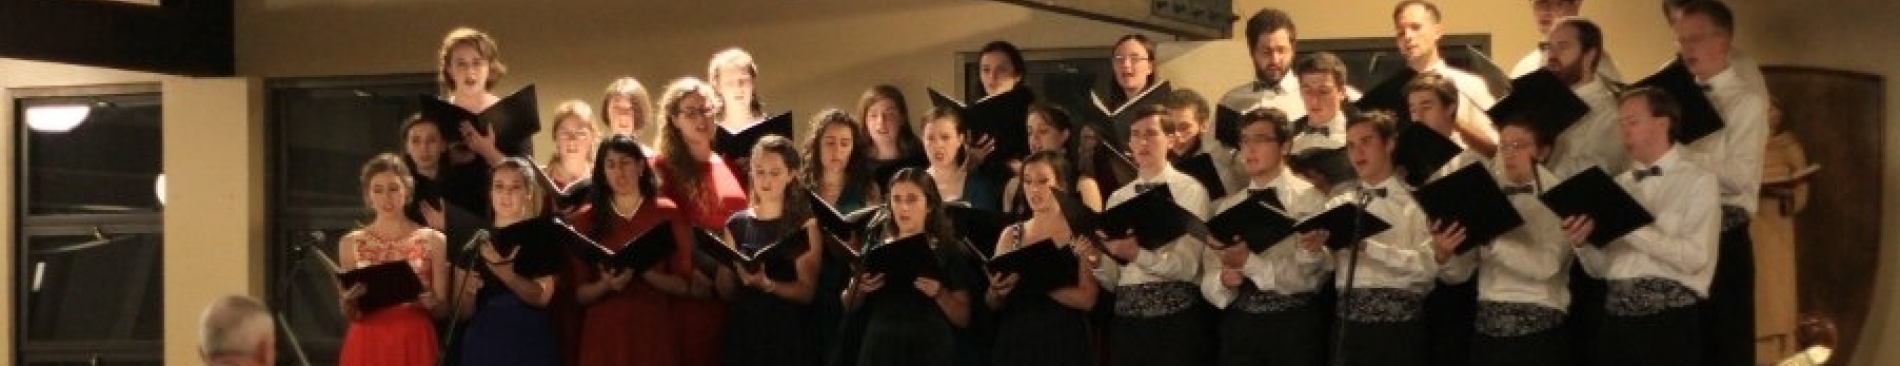 New Video from the Thomas Aquinas College Choir’s November C